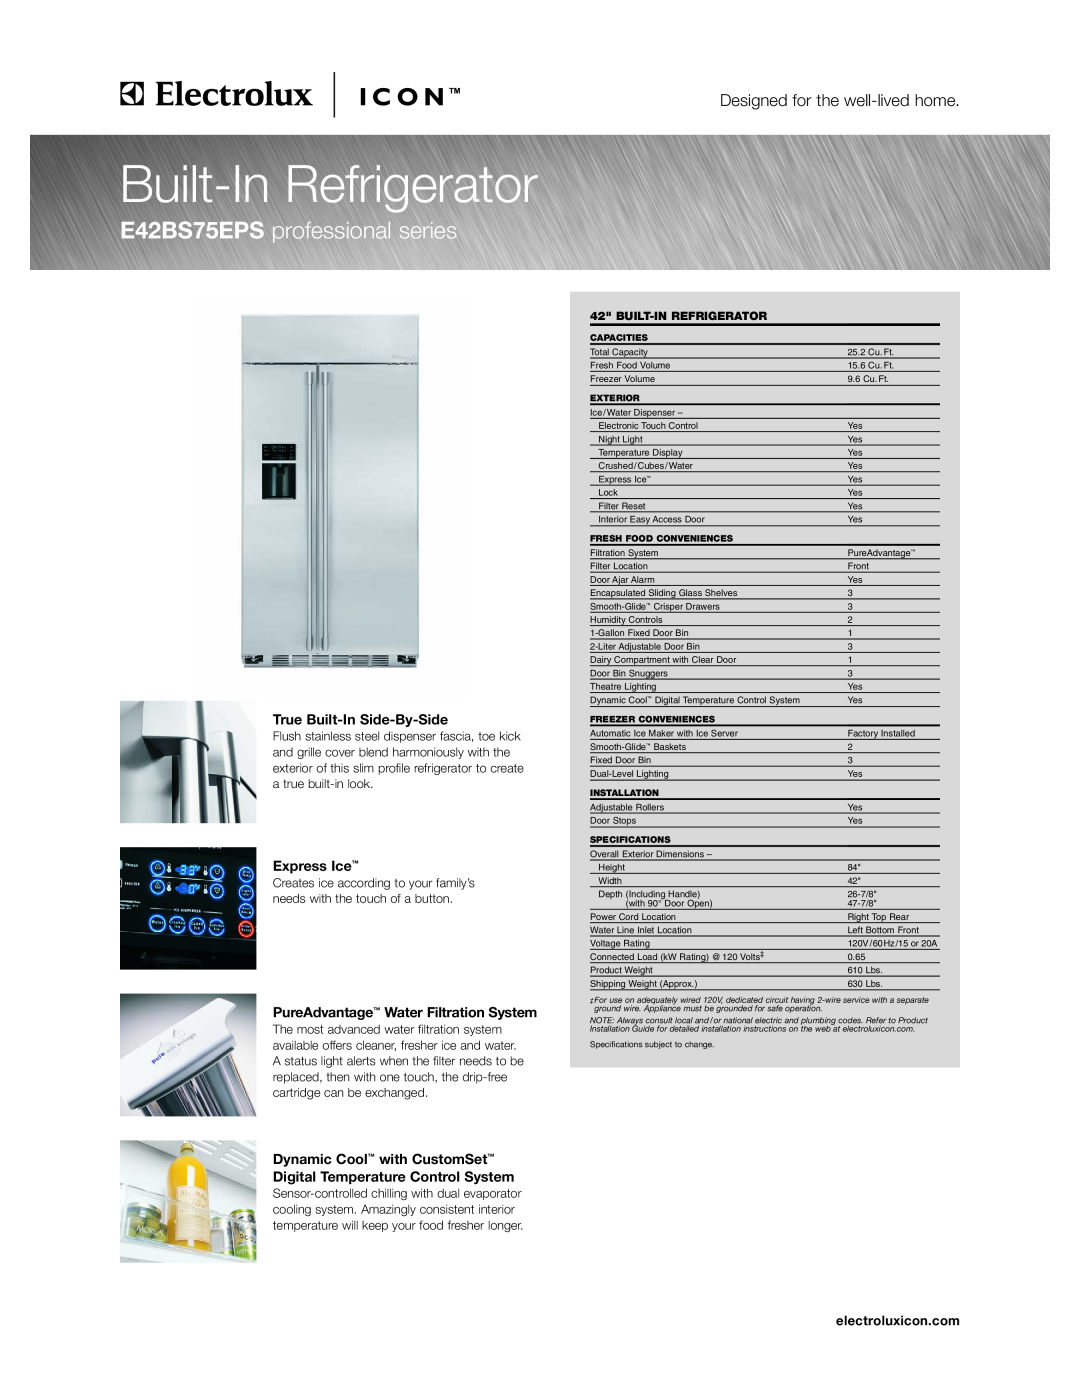 Electrolux E42BS75EPS specifications True Built-In Side-By-Side, Express Ice, PureAdvantage Water Filtration System 